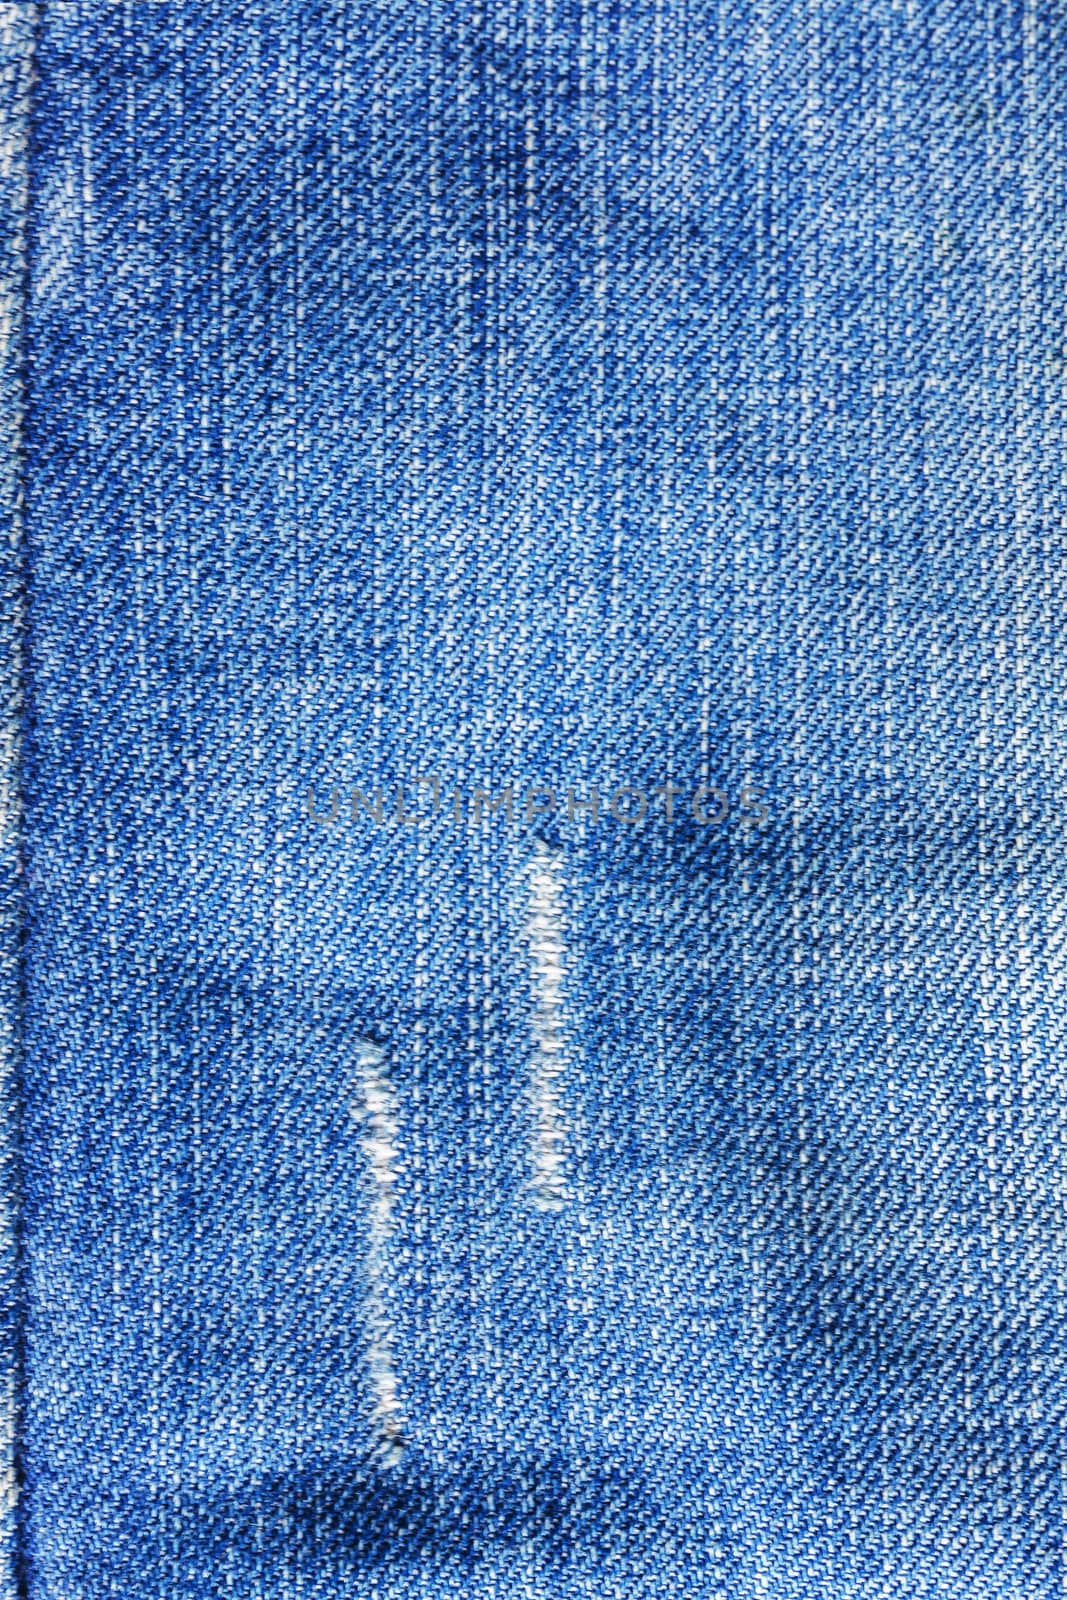 Jeans close-up, texture, torn, mopped pieces. by Tanacha